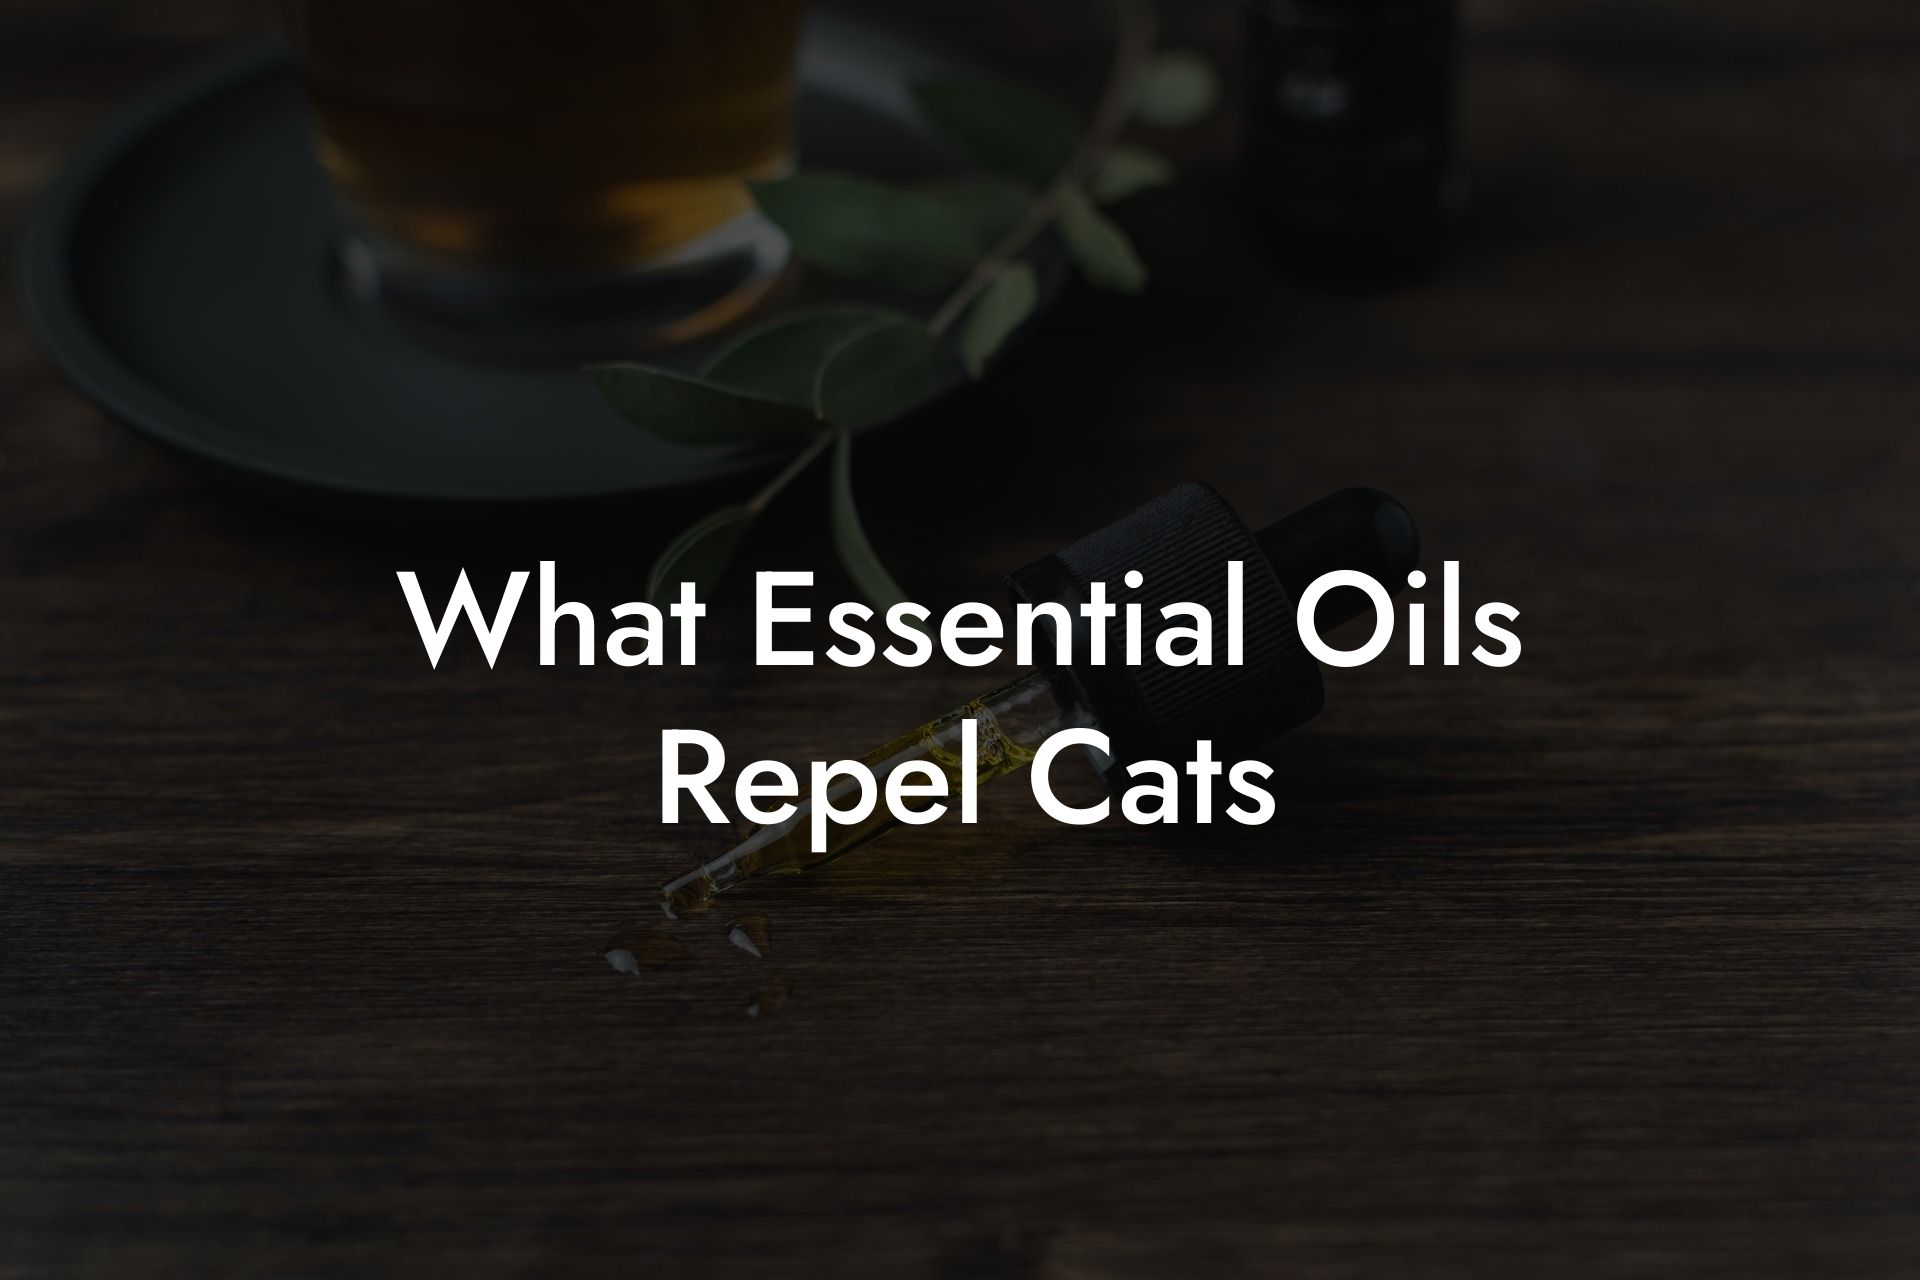 What Essential Oils Repel Cats